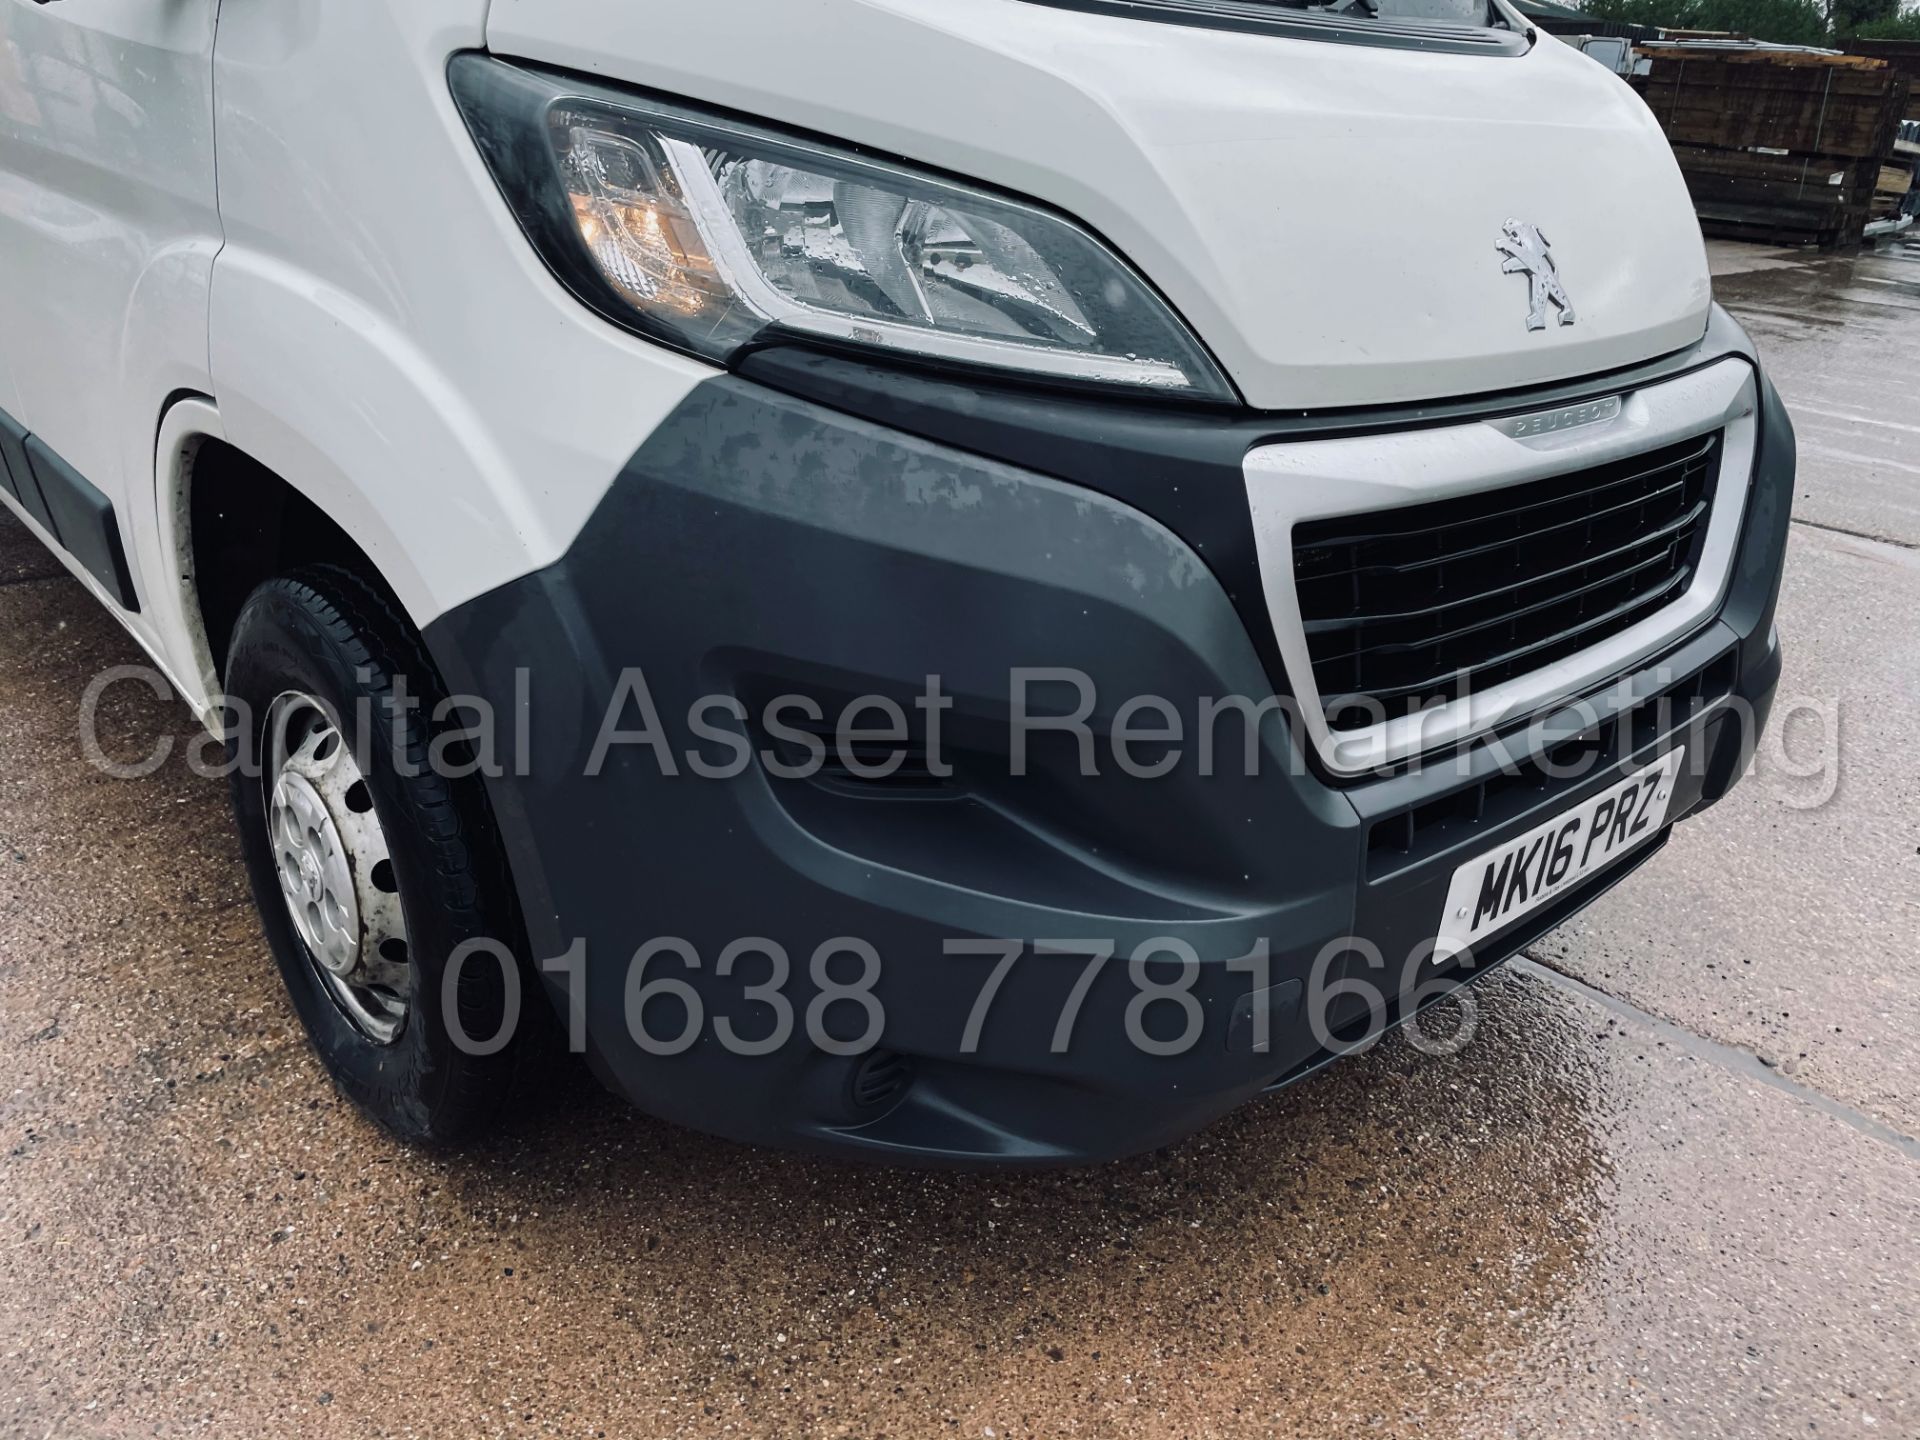 (On Sale) PEUGEOT BOXER 335 *PROFESSIONAL* LWB HI-ROOF (2016) '2.2 HDI - 6 SPEED' *A/C* (1 OWNER) - Image 15 of 41